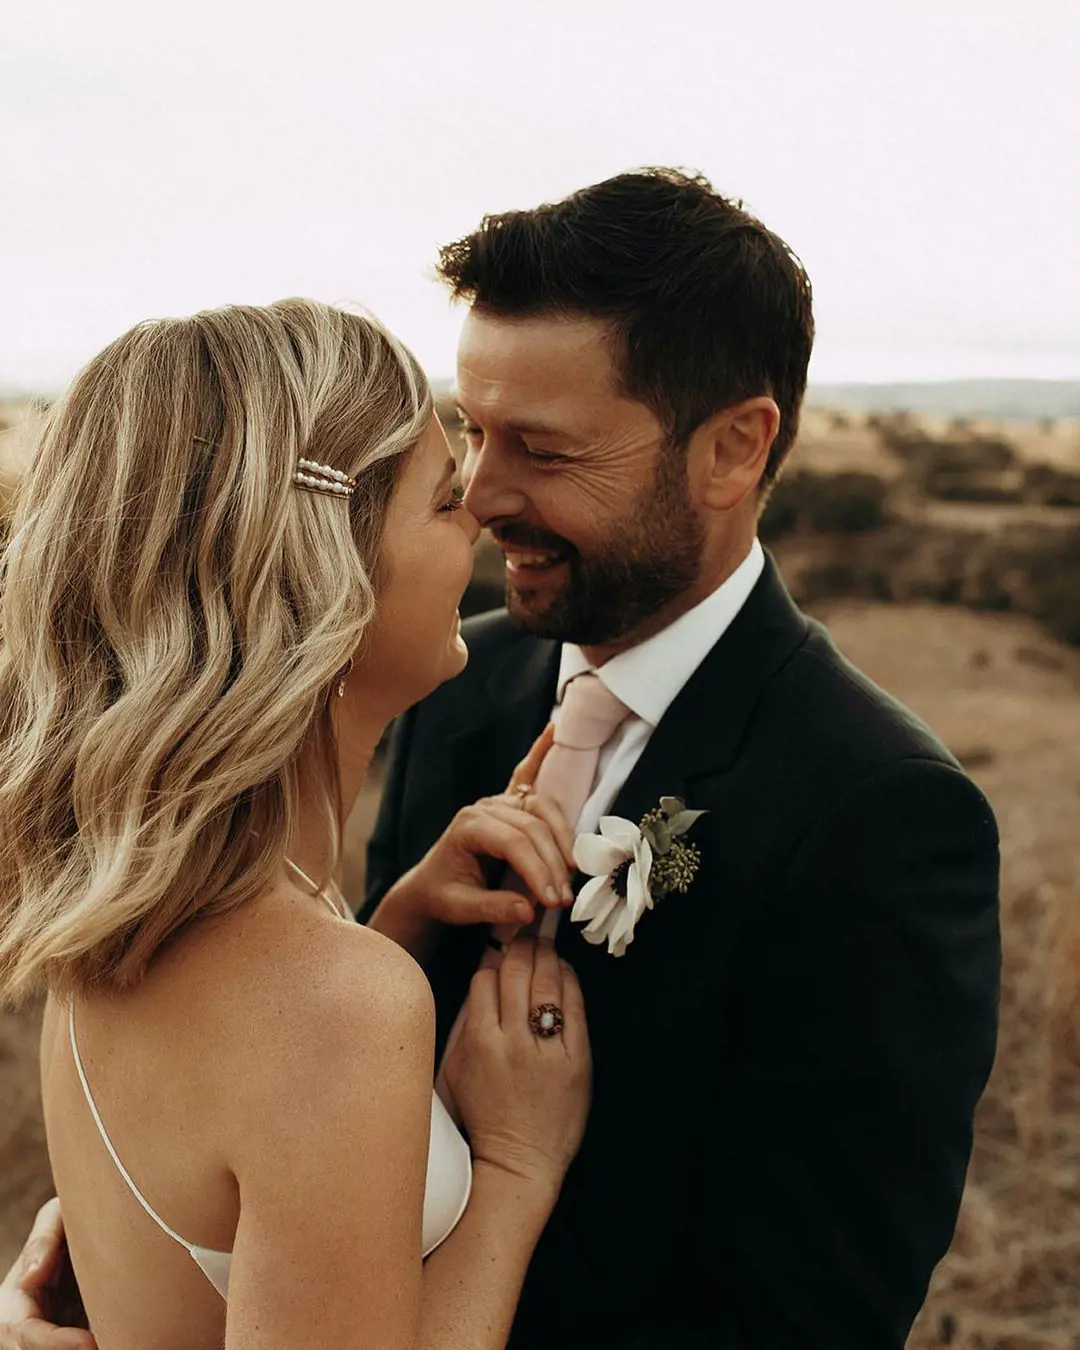 Chris shared photos from their wedding on Instagram to celebrate their first anniversary